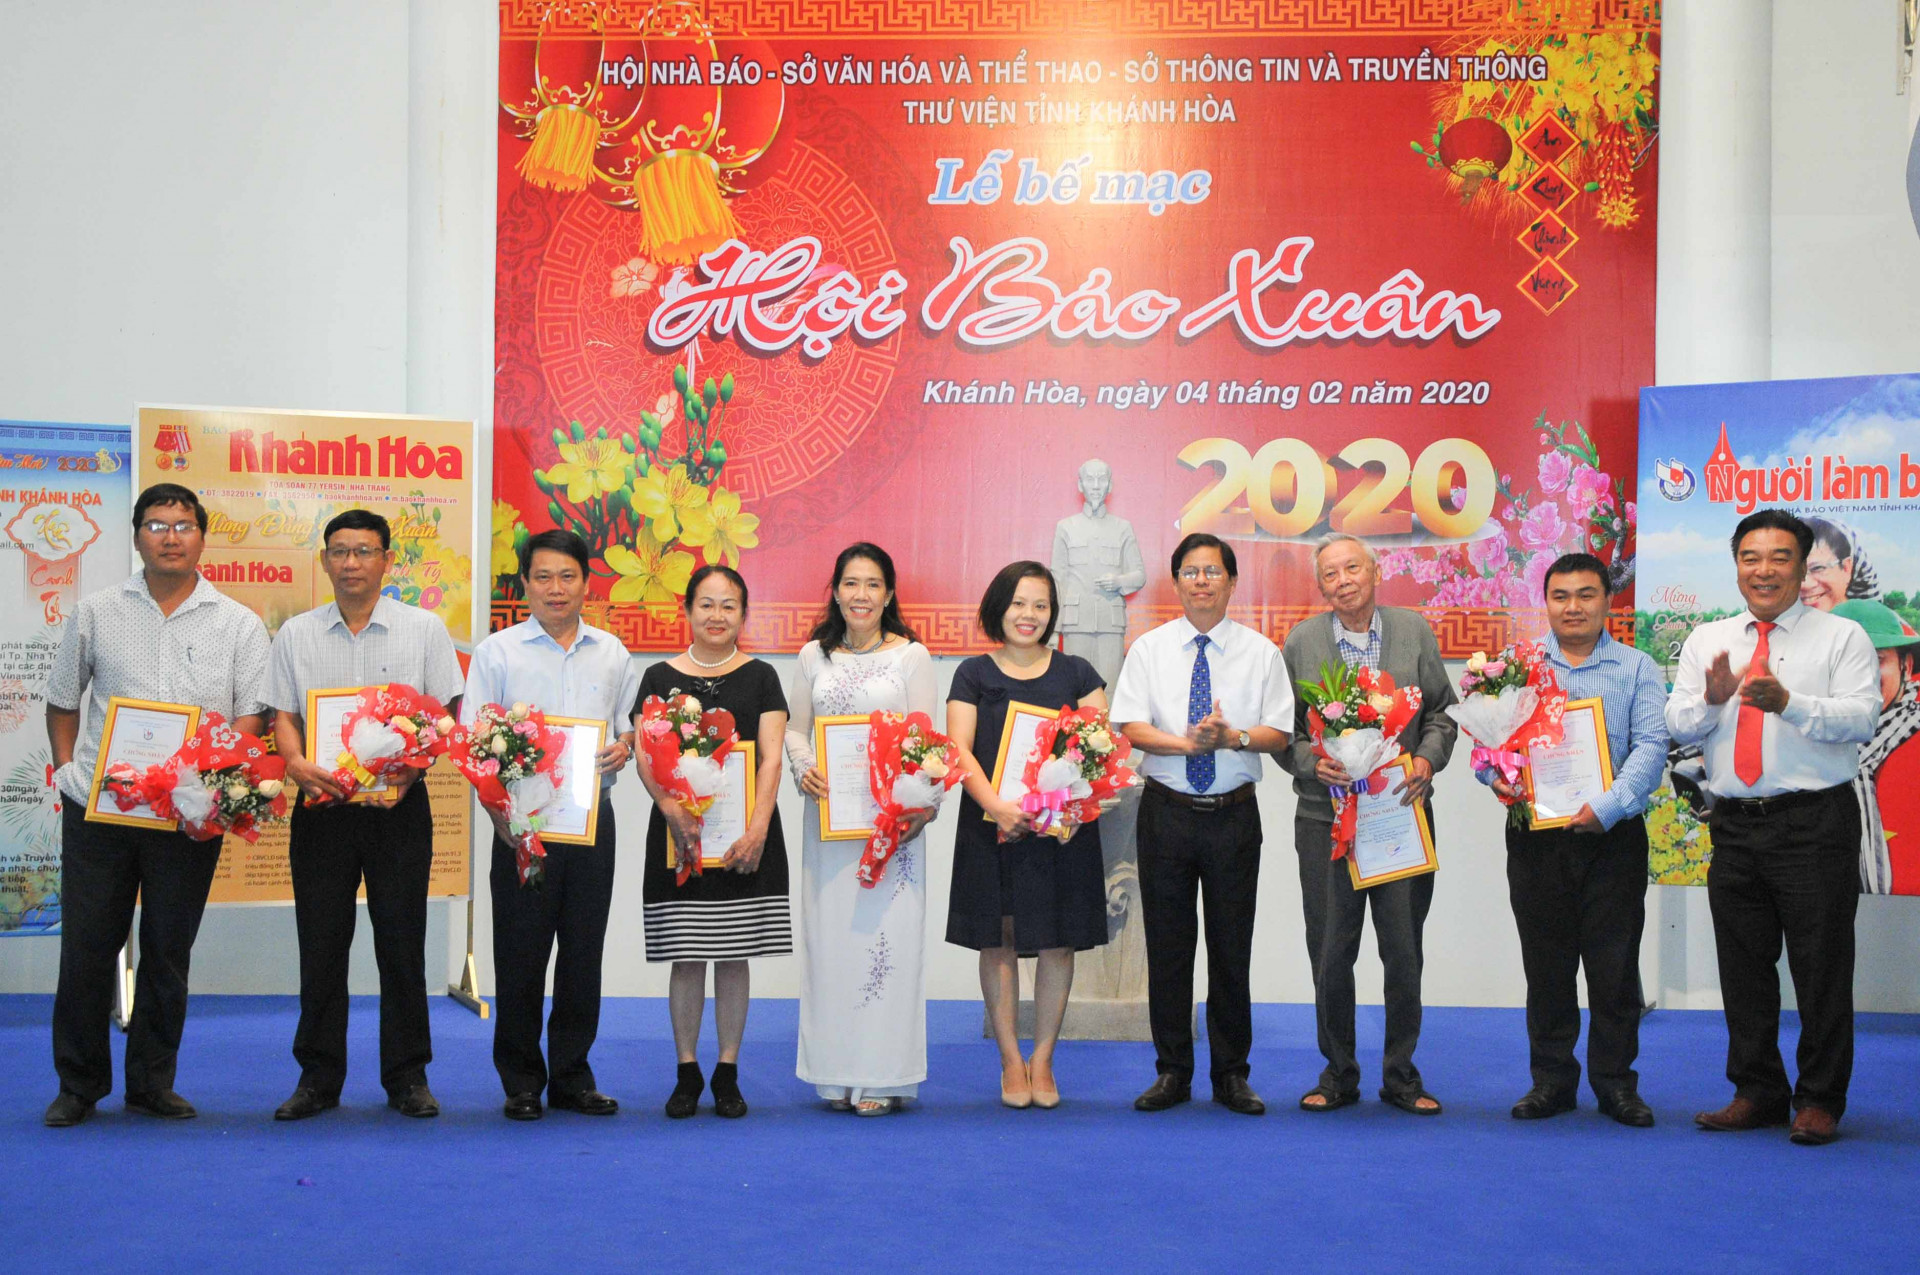 Nguyen Tan Tuan (fourth from right) and leader of Khanh Hoa Province’s Journalists’ Association offering prizes to journalists with excellent works